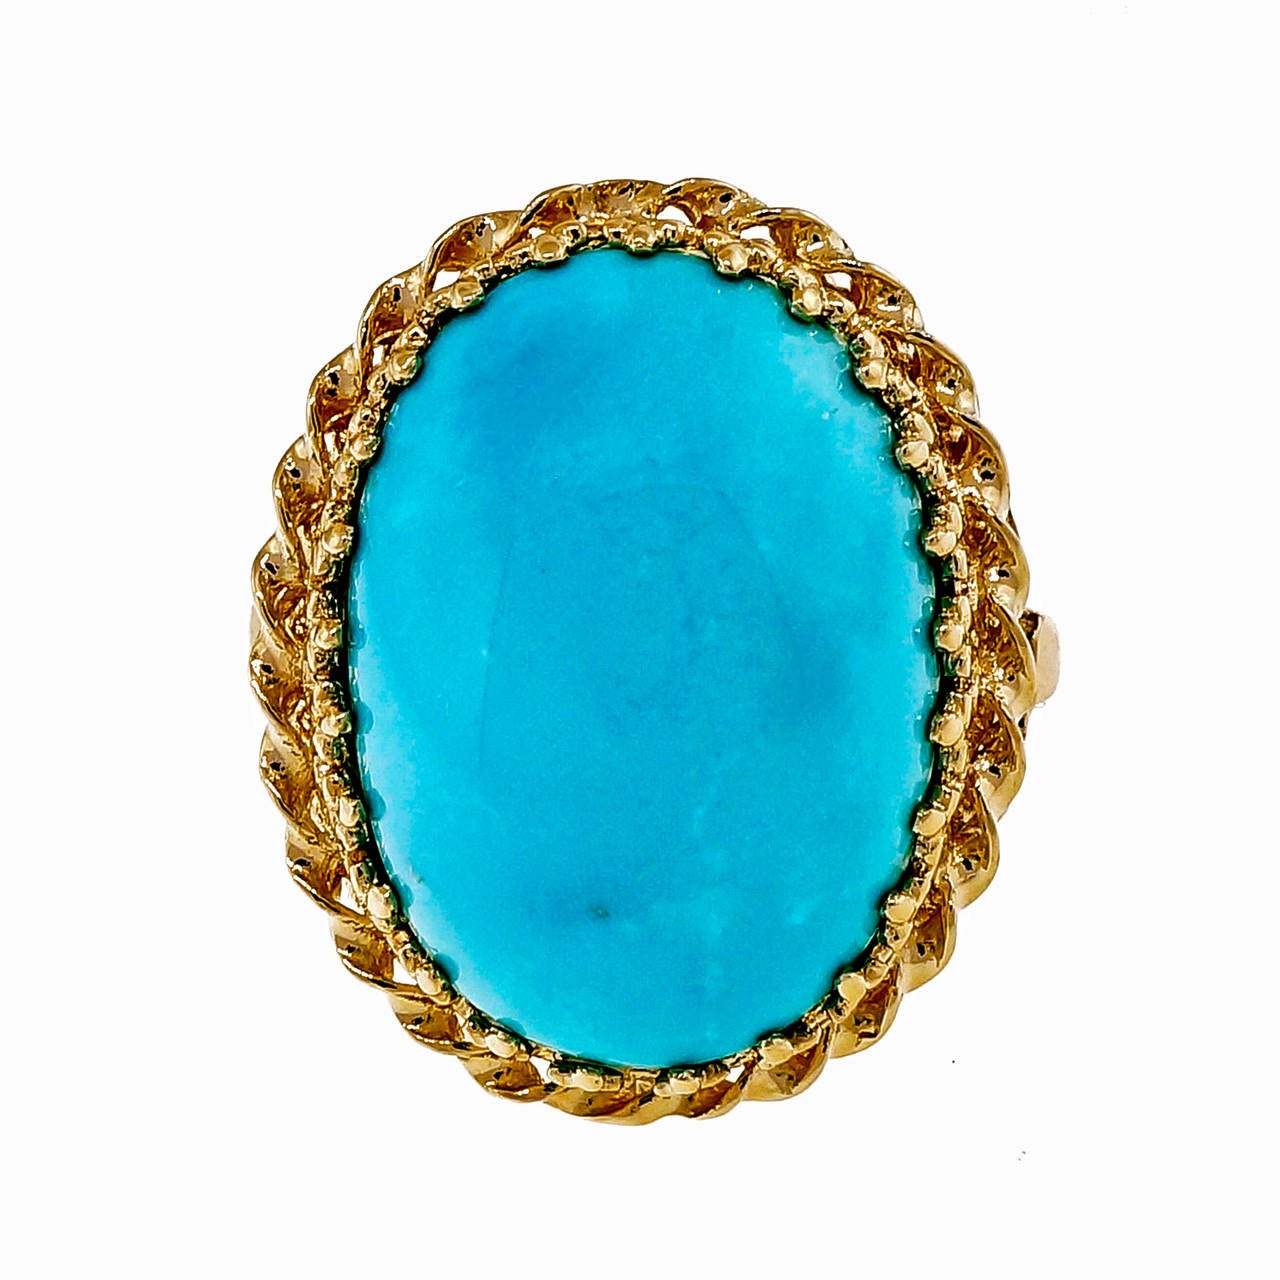 1940-1950 late Retro 14k pink gold natural bright Robins Egg blue totally natural Persian Turquoise ring.

1 bright blue natural Persian Turquoise, approx. total weight 18.00ct, natural
14k pink gold
10.1 grams
Tested and stamped: 14k
Width at